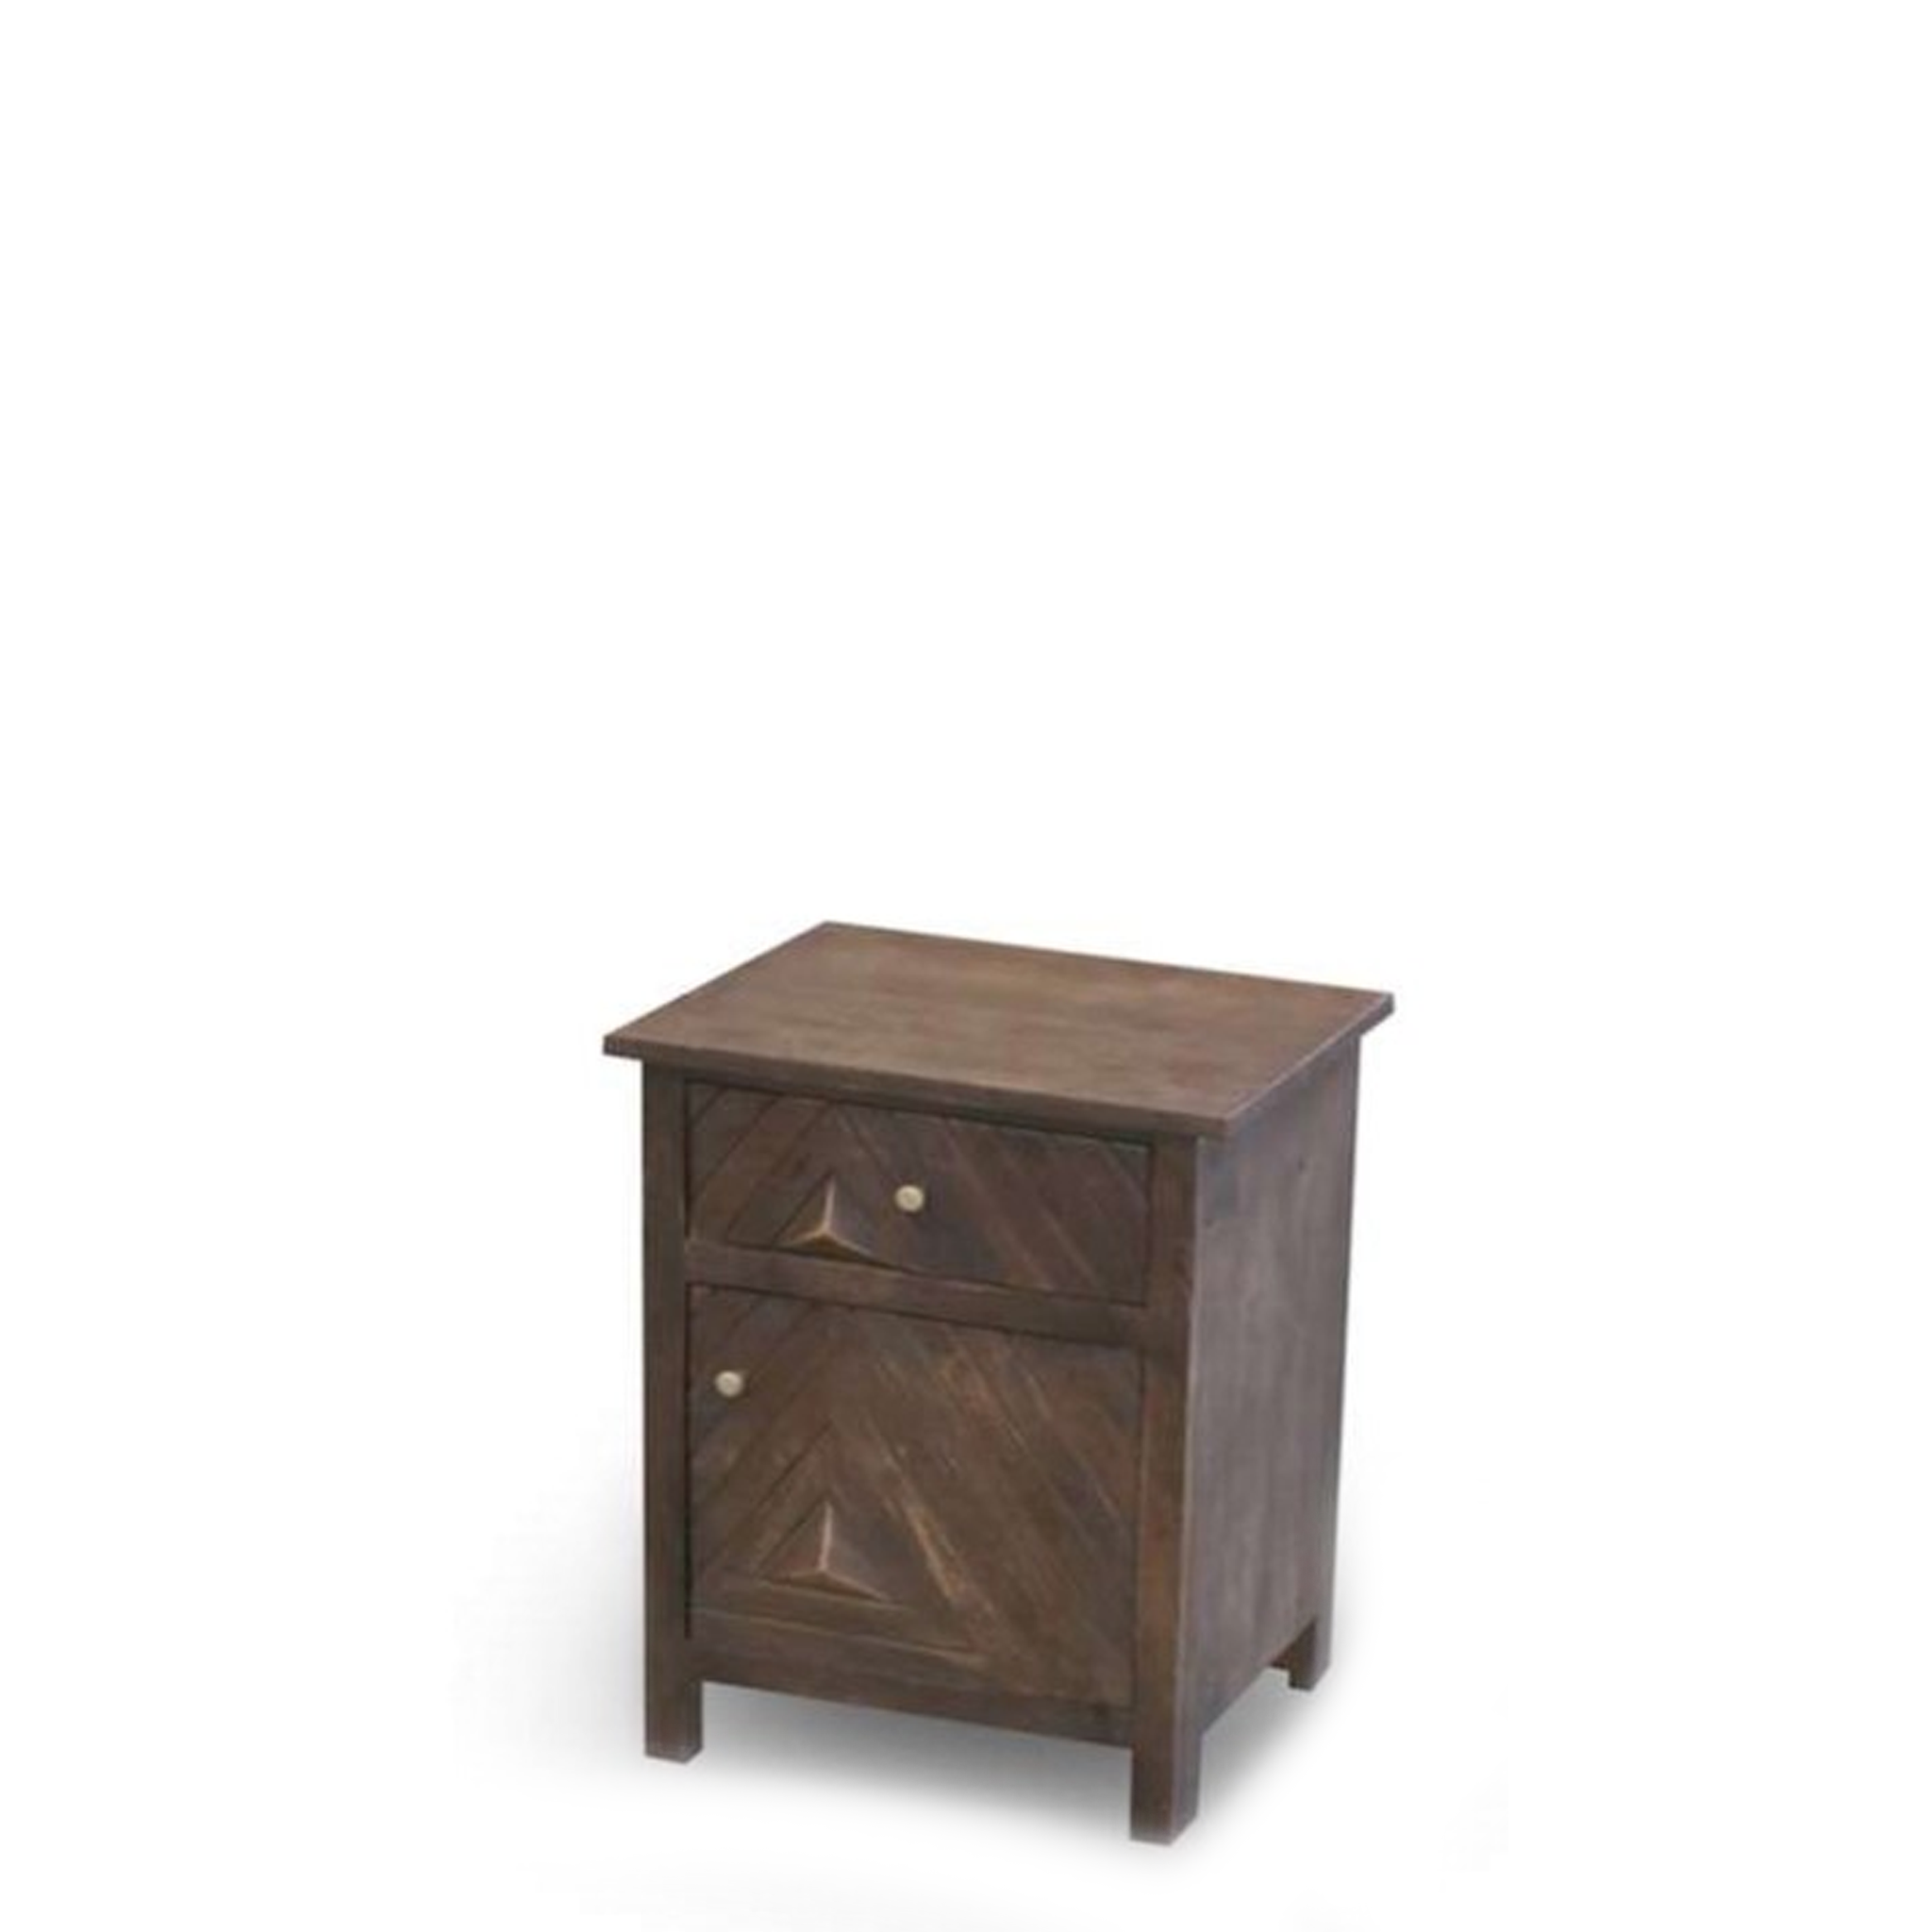 Ebony Night Table - One Drawer and One Door